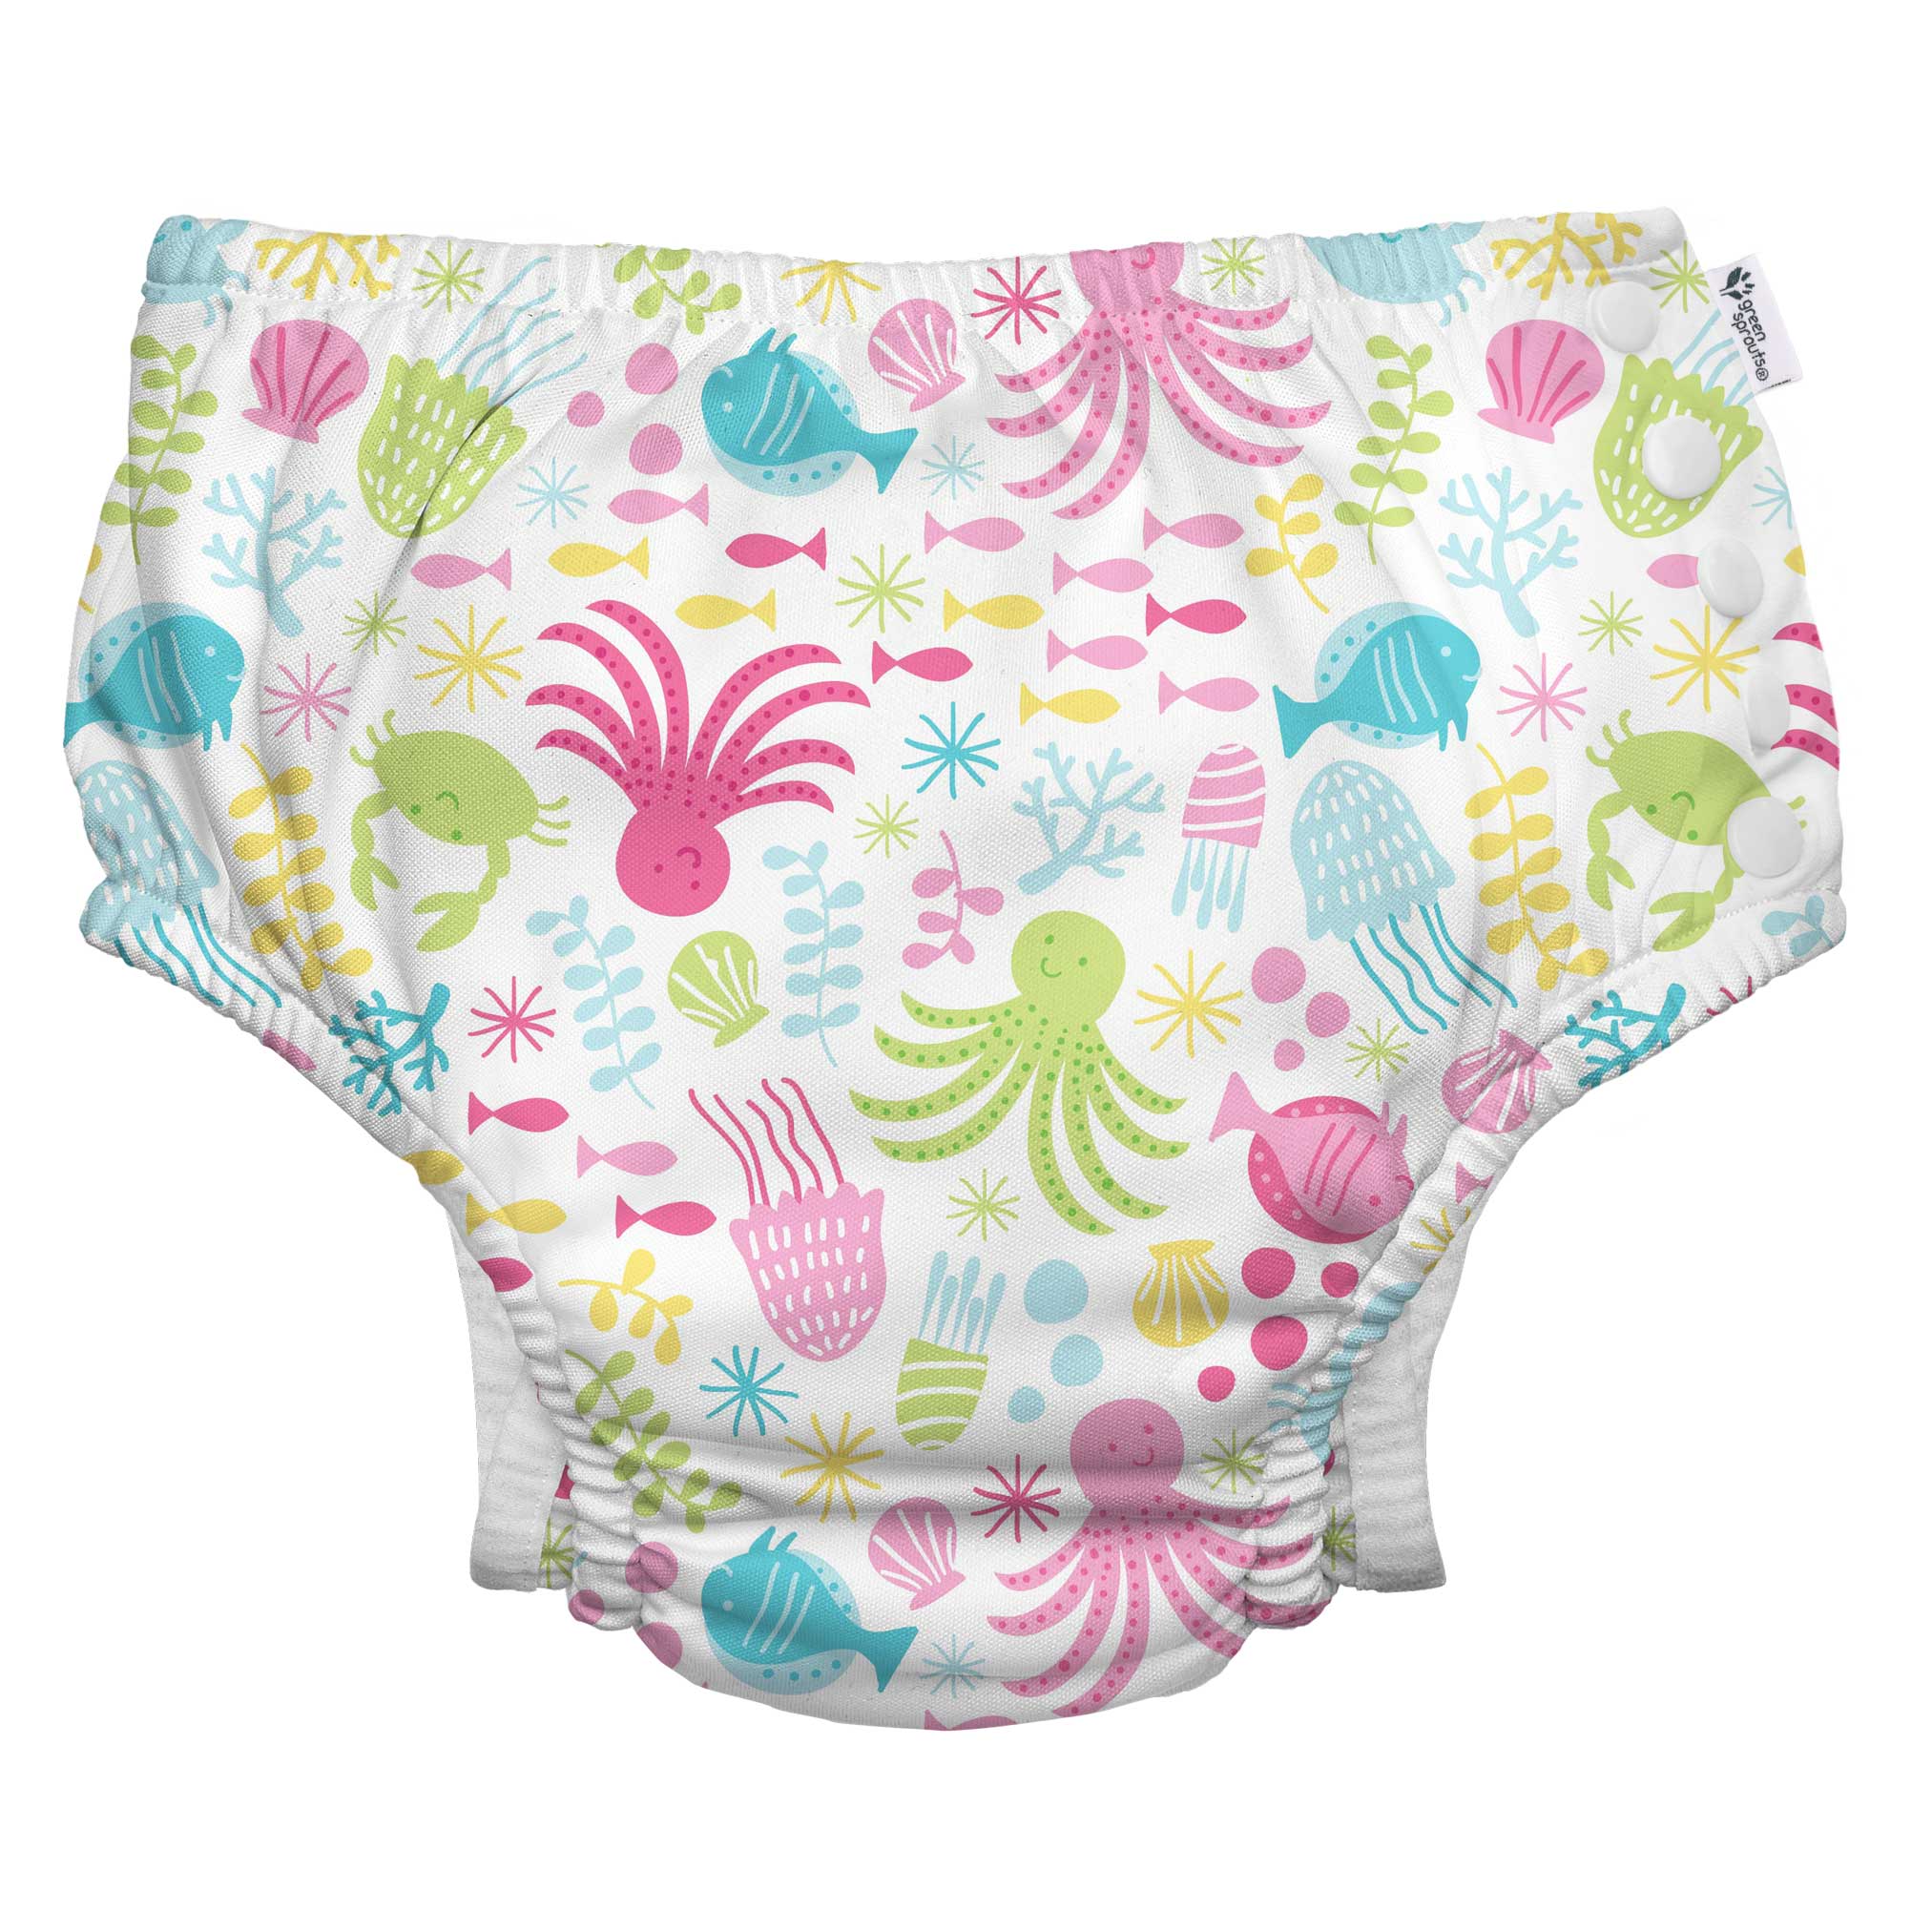 Stress-free swimming meets eco-friendliness! Our Eco Snap Swim Diaper (Classic Collection) offers UPF 50+ sun protection, leakproof design, & recycled materials. Shop worry-free fun now!